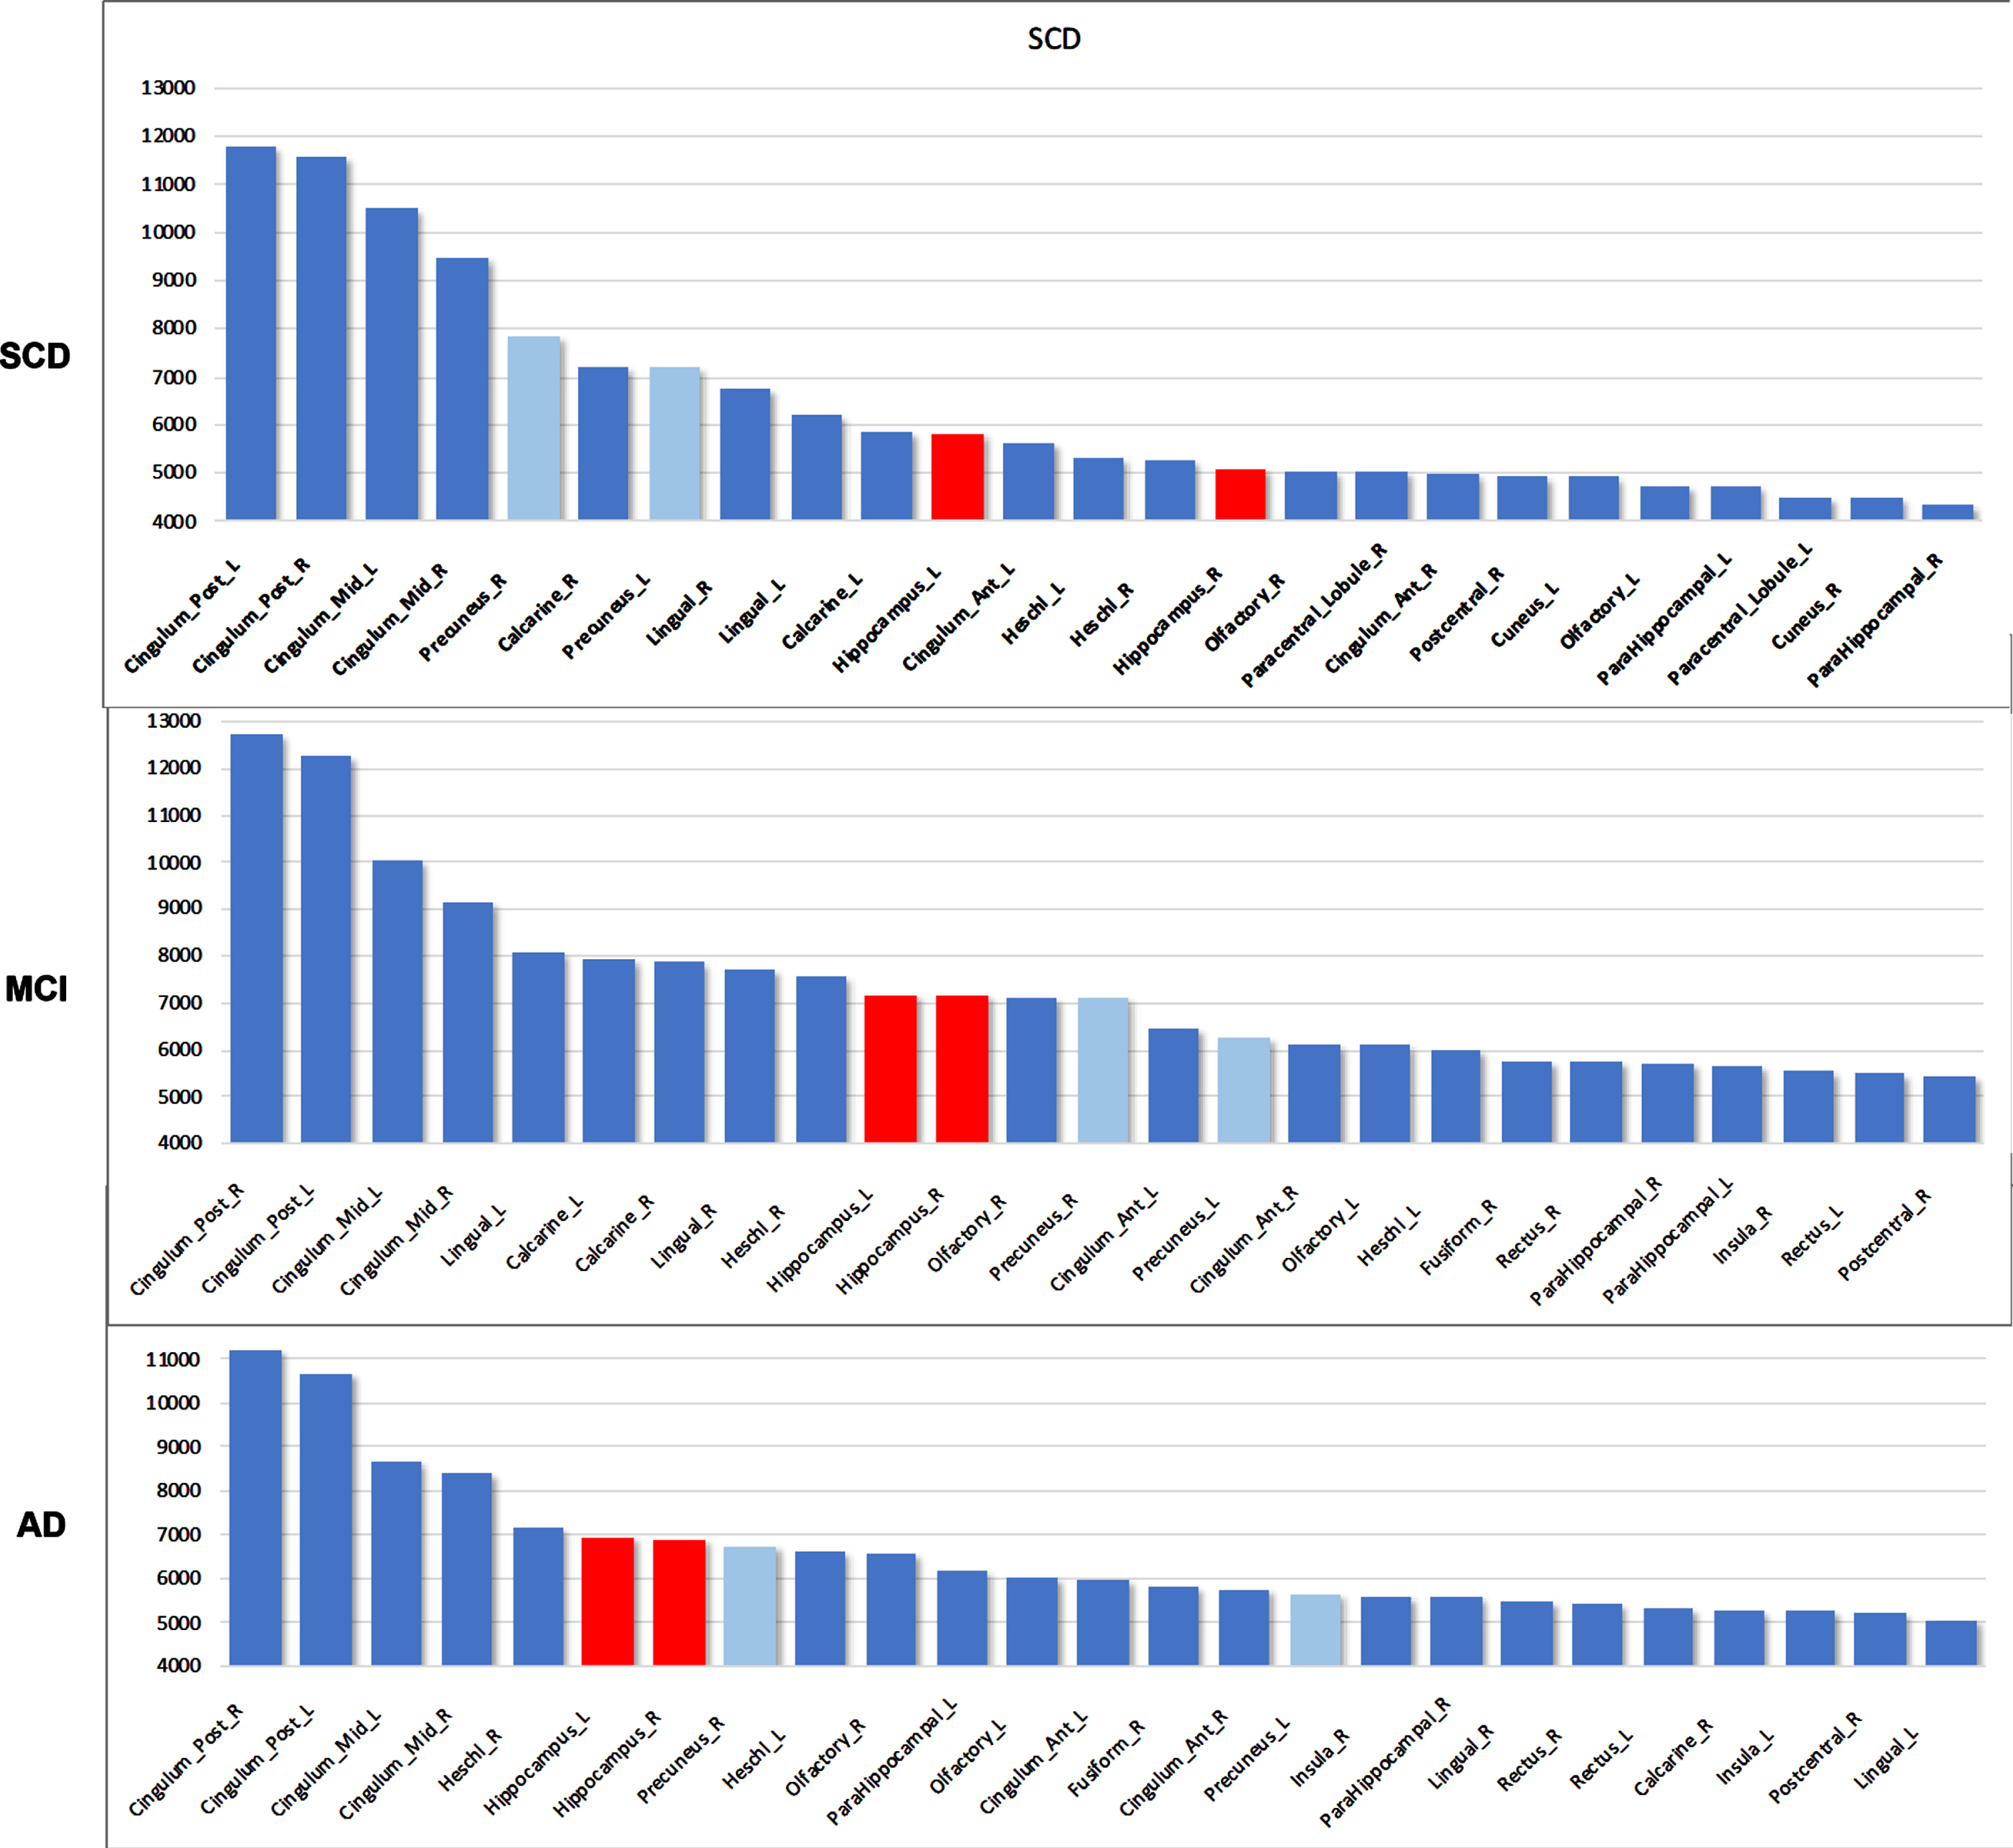 Total power ranking for top 25 AAL regions. Hippocampus (red) rises in rank over the disease course. Precuneal regions (light blue) and lingual gyrus, on the other hand, drop in rank. Y-axis values indicate absolute total power values. SCD, subjective cognitive decline; MCI, mild cognitive impairment; AD, Alzheimer’s disease. Hippocampal regions are colored red, precuneus region is colored light blue. L, left; R, right.